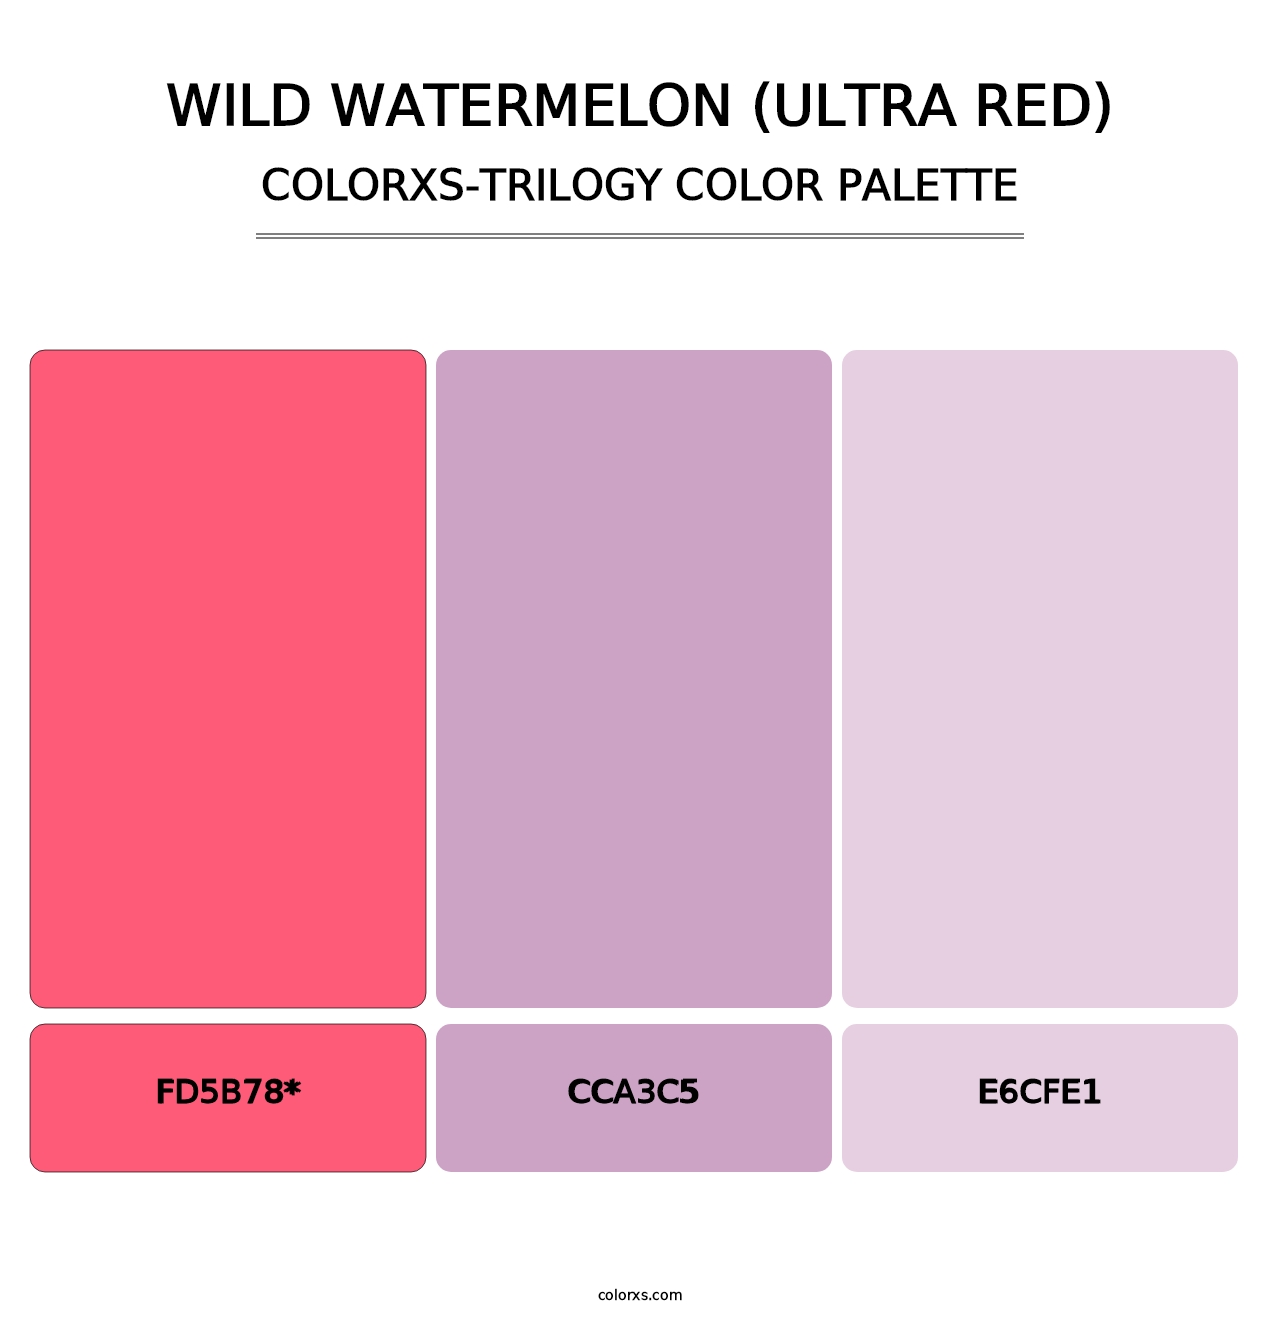 Wild Watermelon (Ultra Red) - Colorxs Trilogy Palette